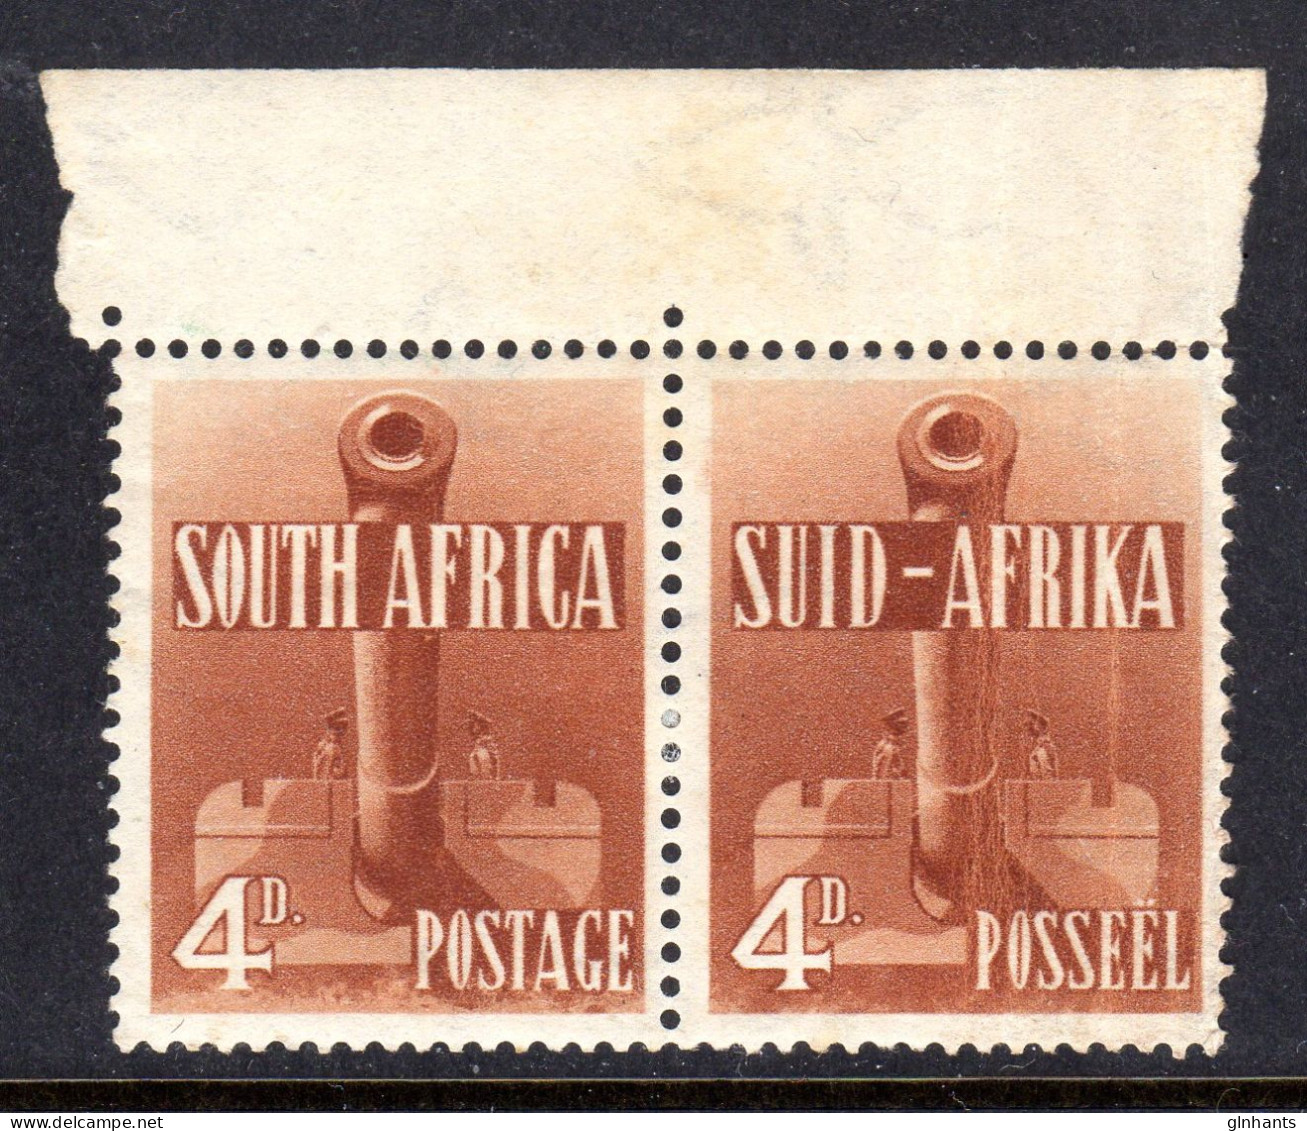 SOUTH AFRICA - 1941 4d GUN ARTILLARY HORIZONTAL PAIR MOUNTED MINT MM * SG 92 (2 SCANS) - Unused Stamps